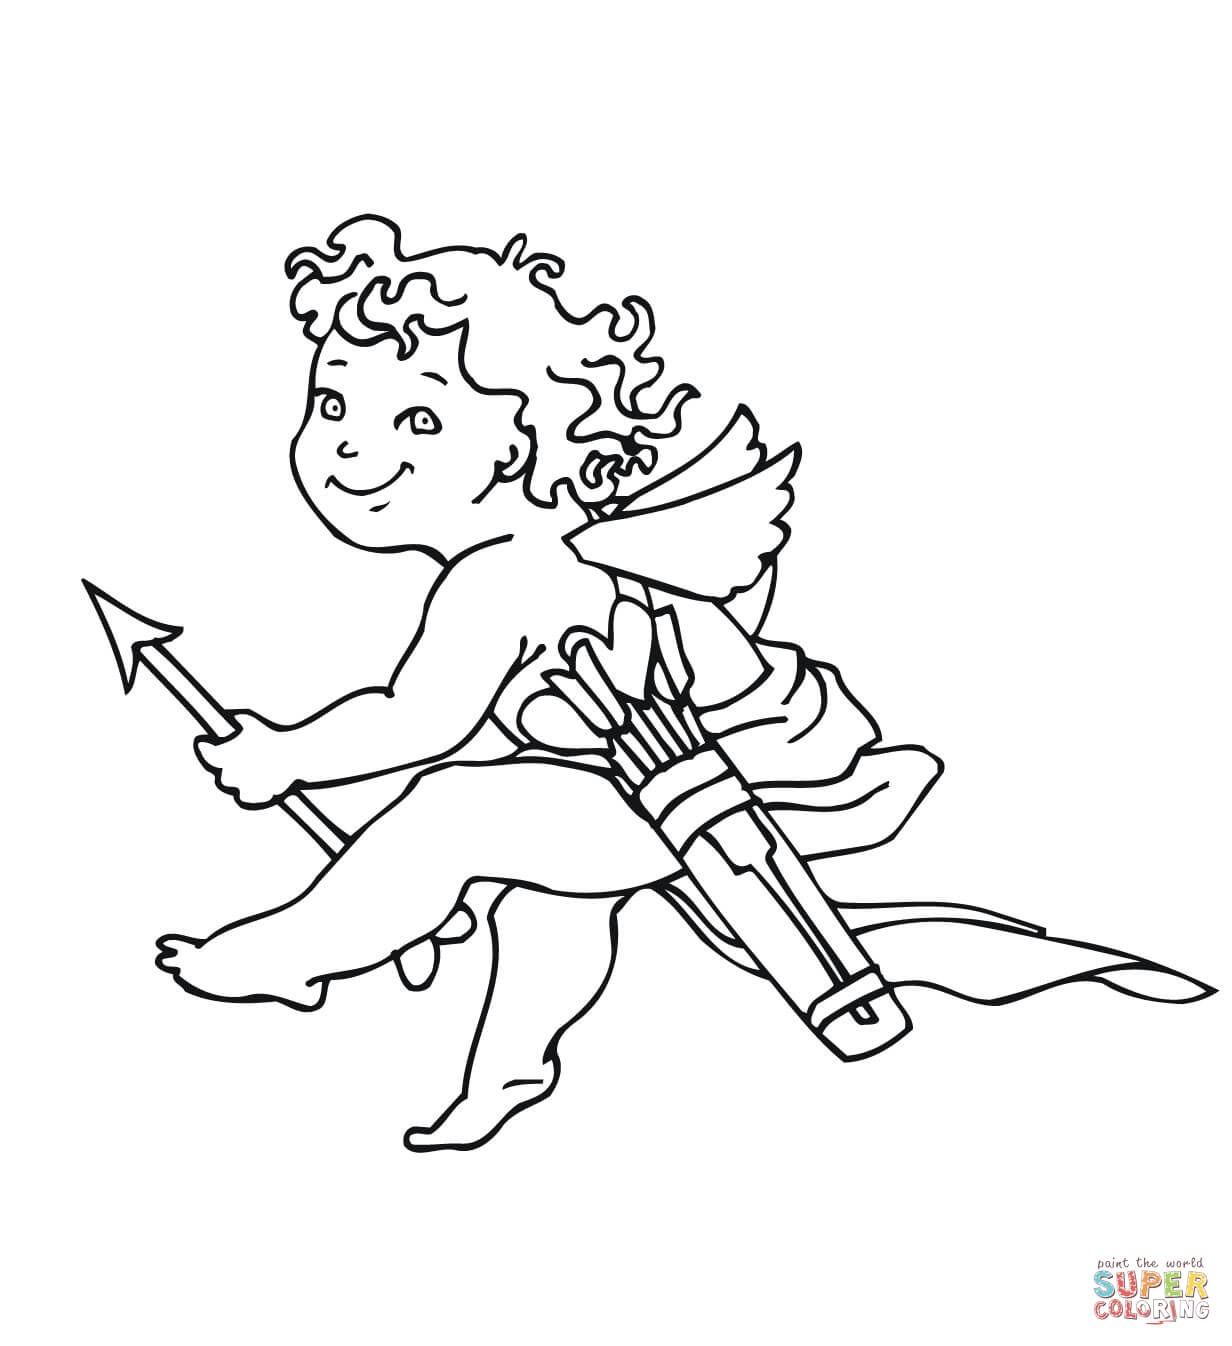 Valentine&amp;#039;s Day Cupid Coloring Page | Free Printable Coloring Pages - Free Printable Pictures Of Cupid